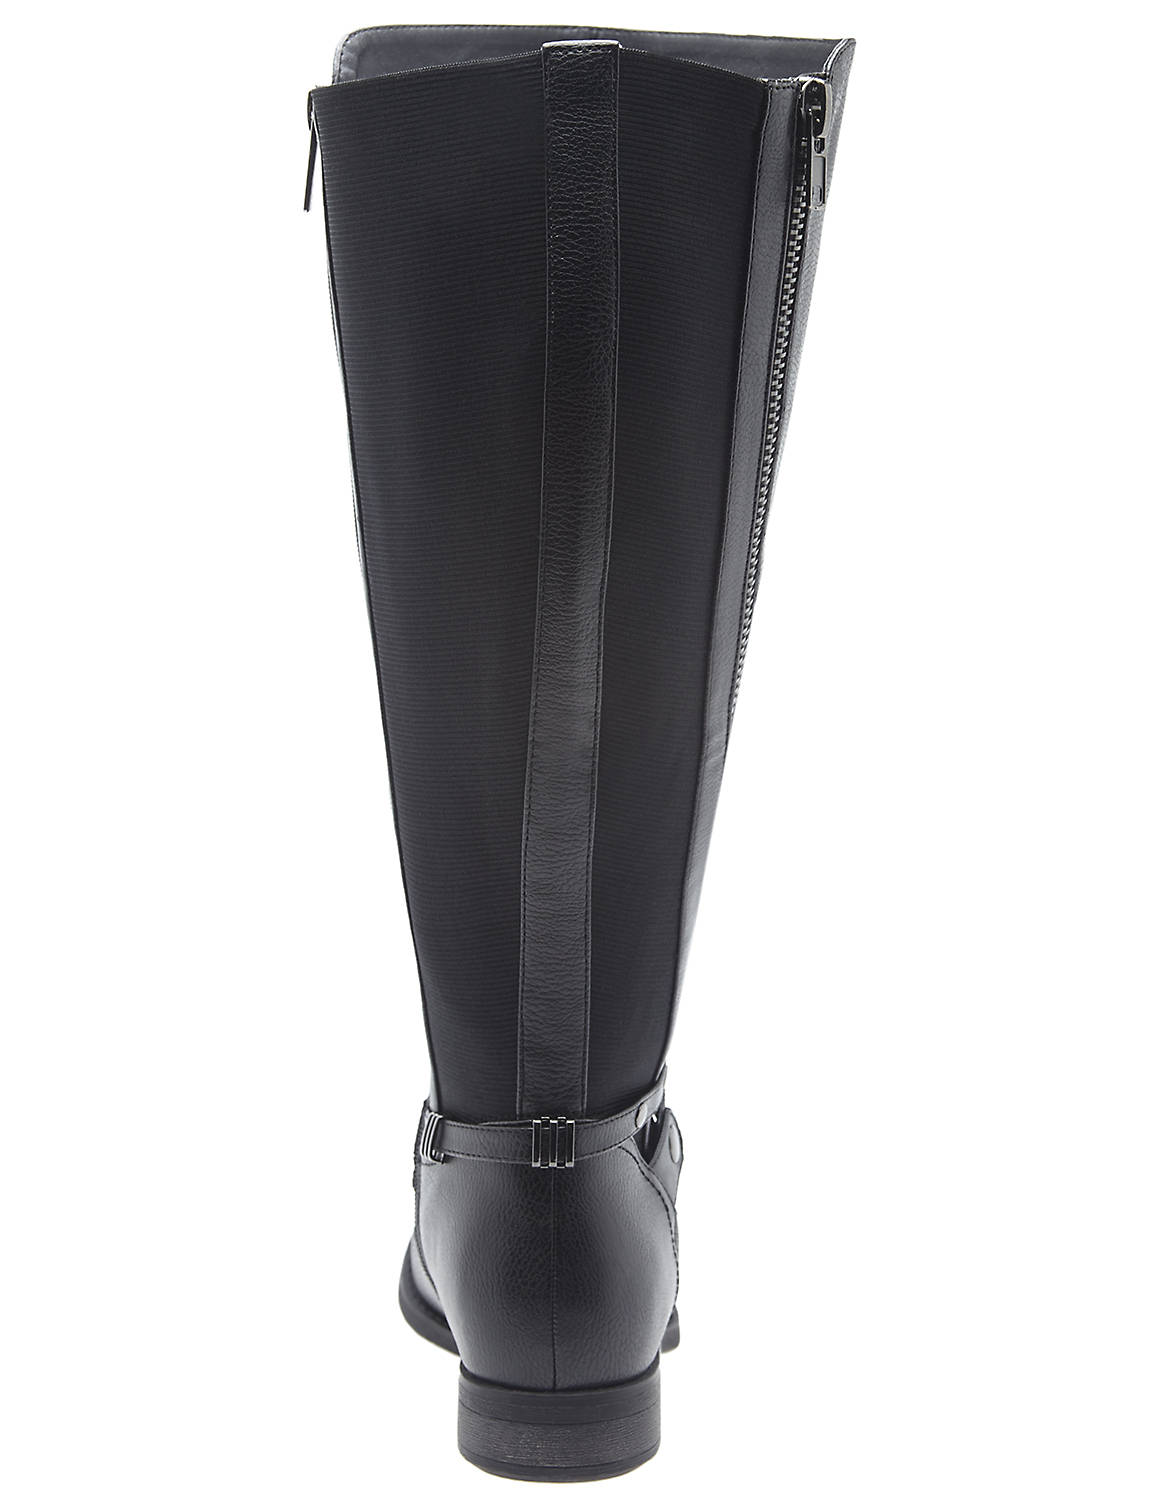 ZIPPER DETAIL RIDING BOOT Product Image 5